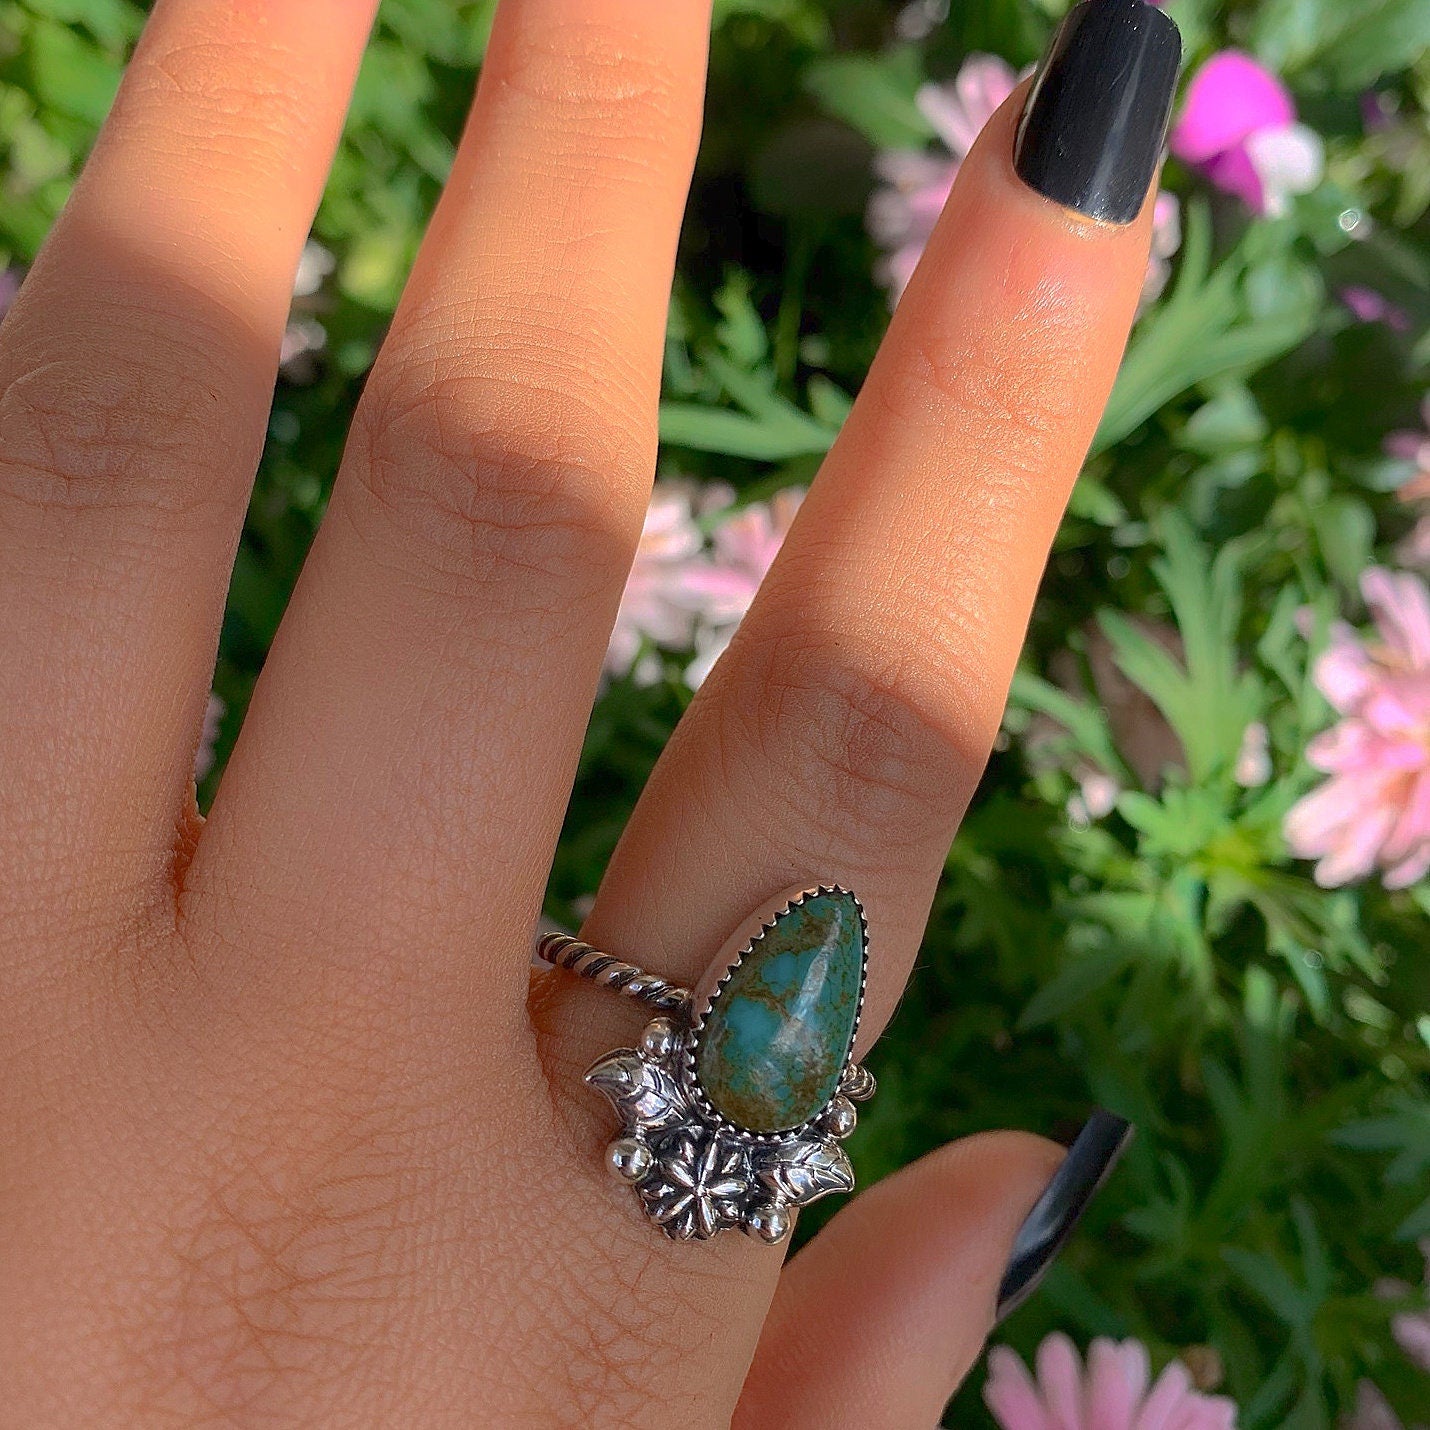 King's Manassa Turquoise Ring - Size 10 - Sterling Silver - Aqua Turquoise Jewelry - Real Turquoise - Green Turquoise Flower Leaf Ring OOAK